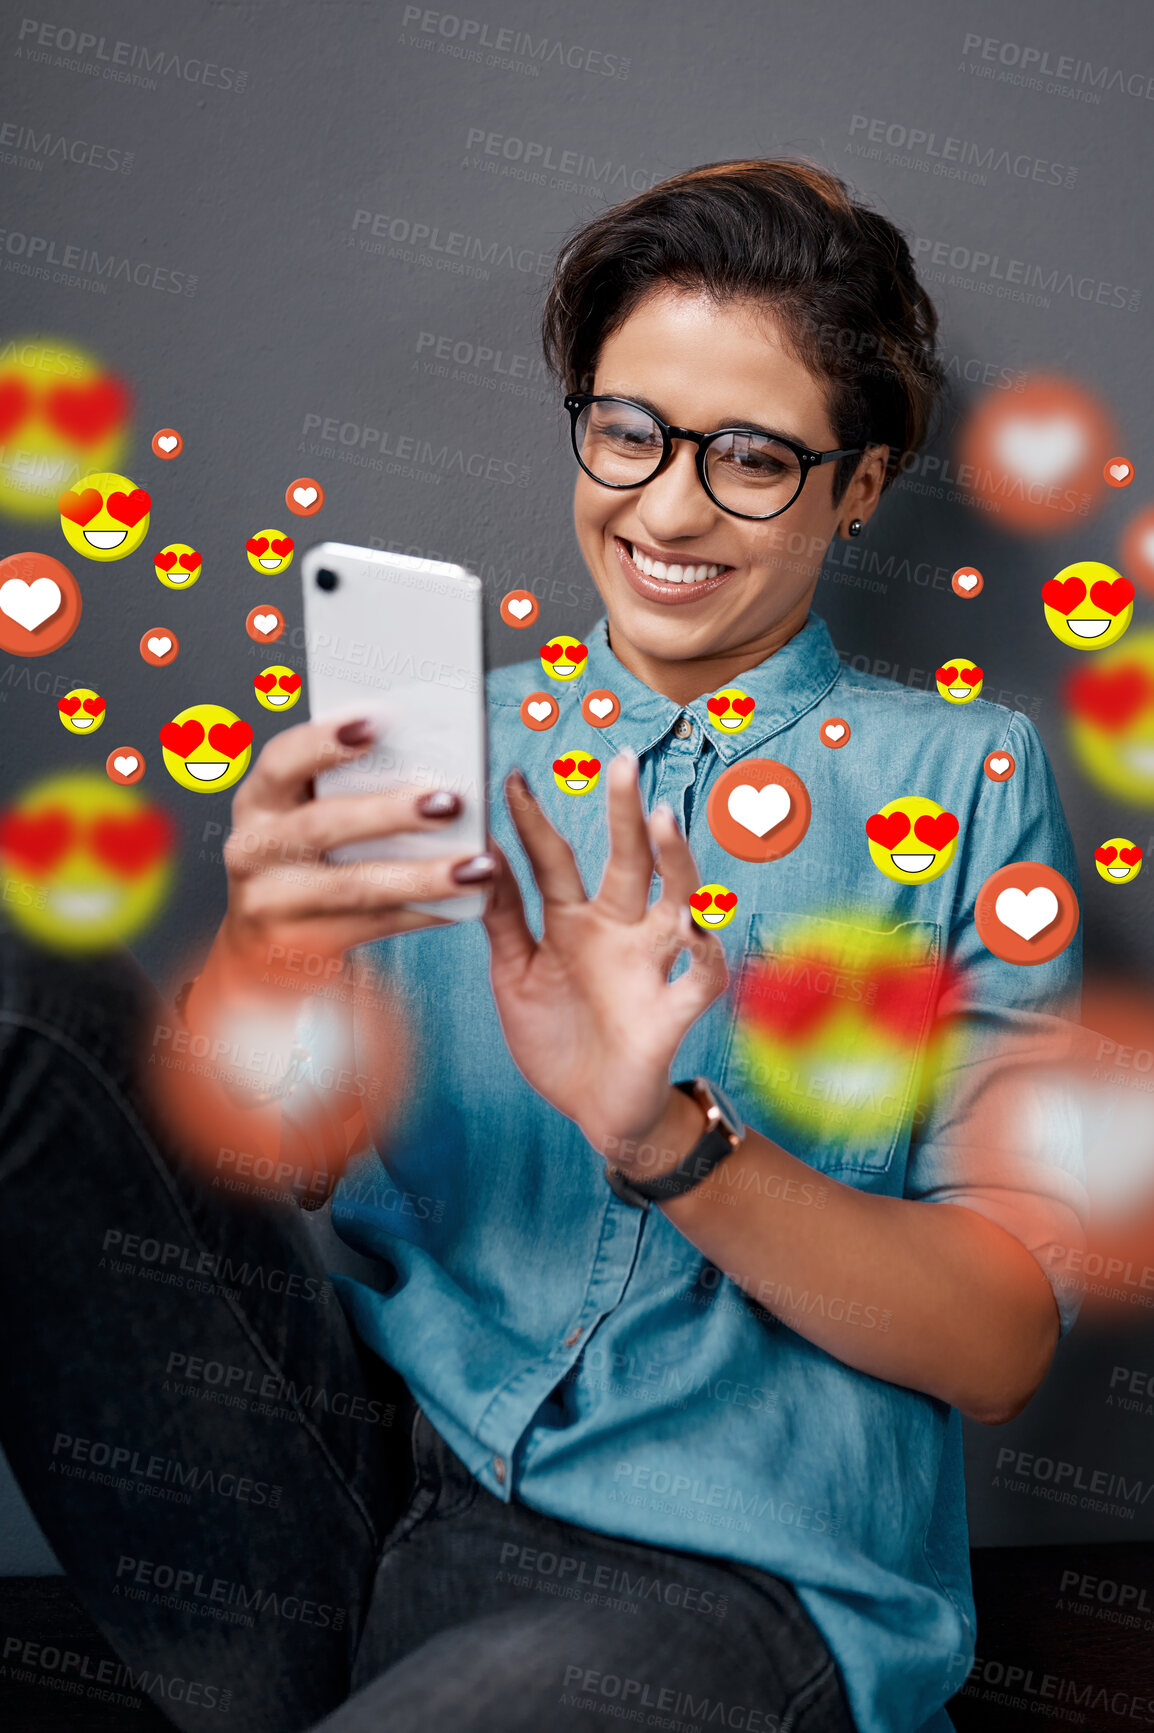 Buy stock photo Smile, love emoji or happy woman with a phone for communication, social media texting or online dating. Graphic overlay or relaxed girl on mobile app website or digital network with heart emoticons